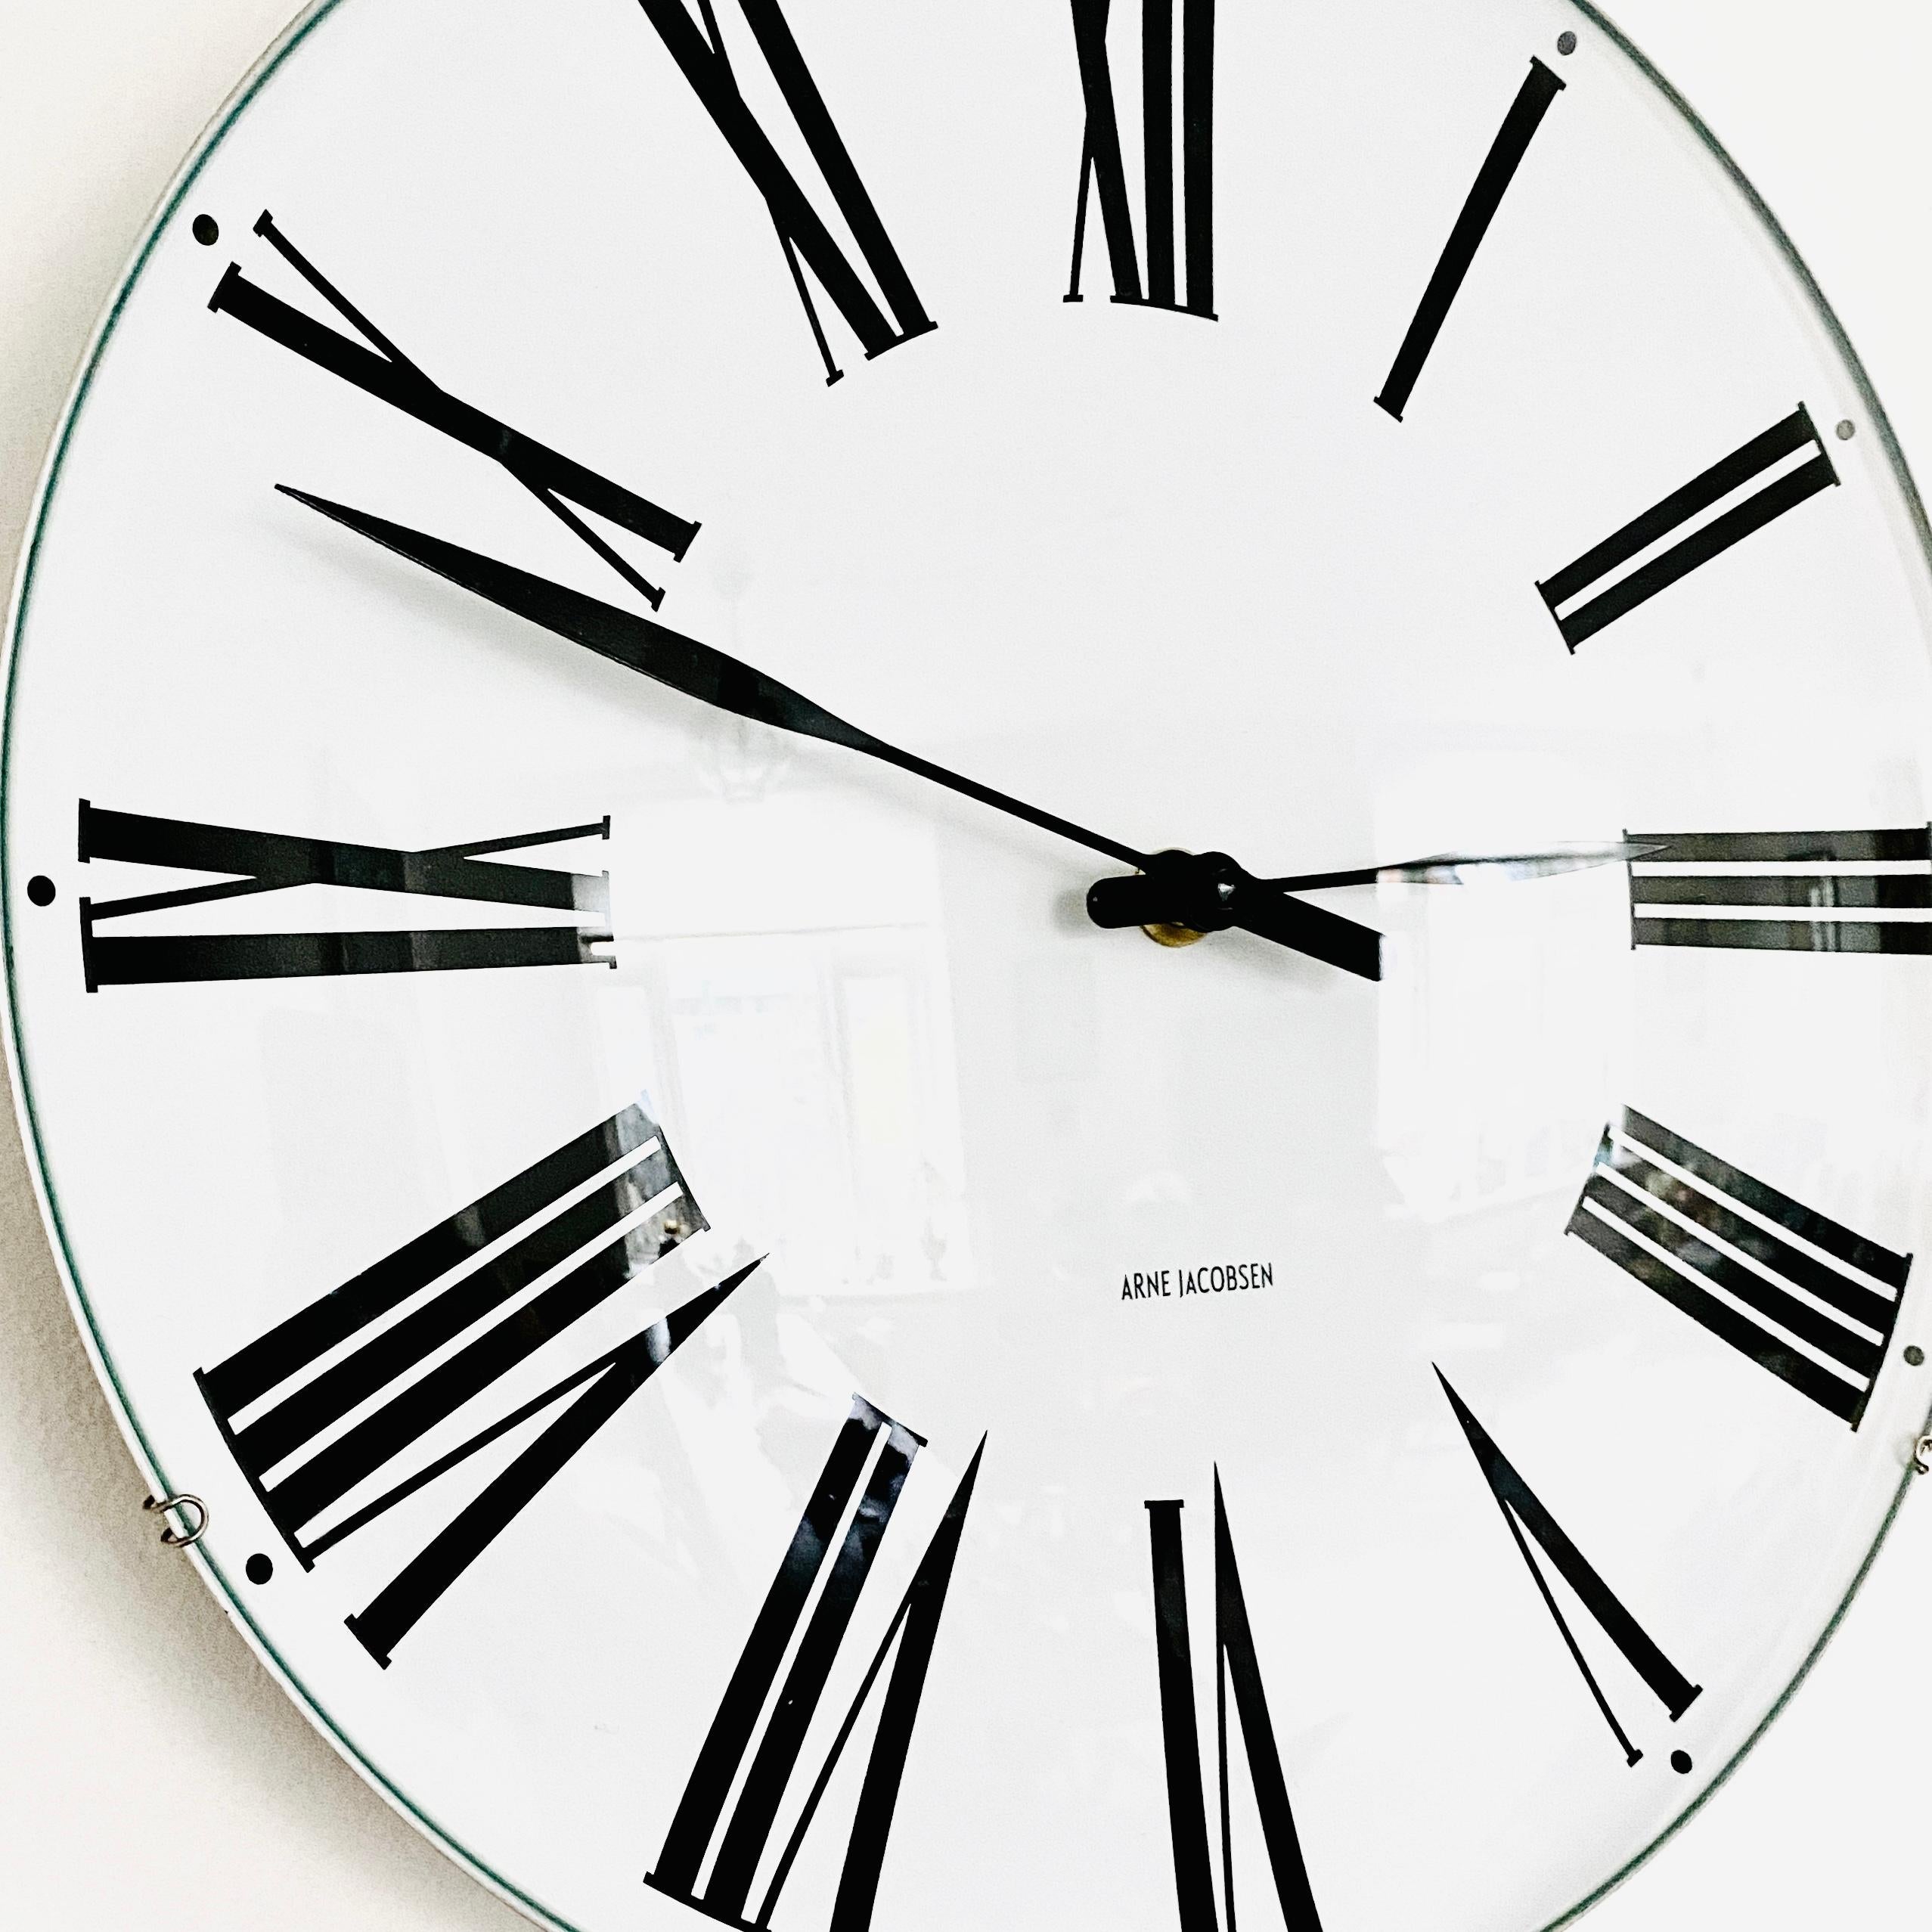 Danish Mid-Century Modern Wall Clock by Arne Jacobsen model Roma with Quartz clockwork.

Arne Jacobsen for Rosendahl. Steel wall clock with white dial and black Roman numerals, hour and minute hands. This model measures 29cm / 11,5 inches in